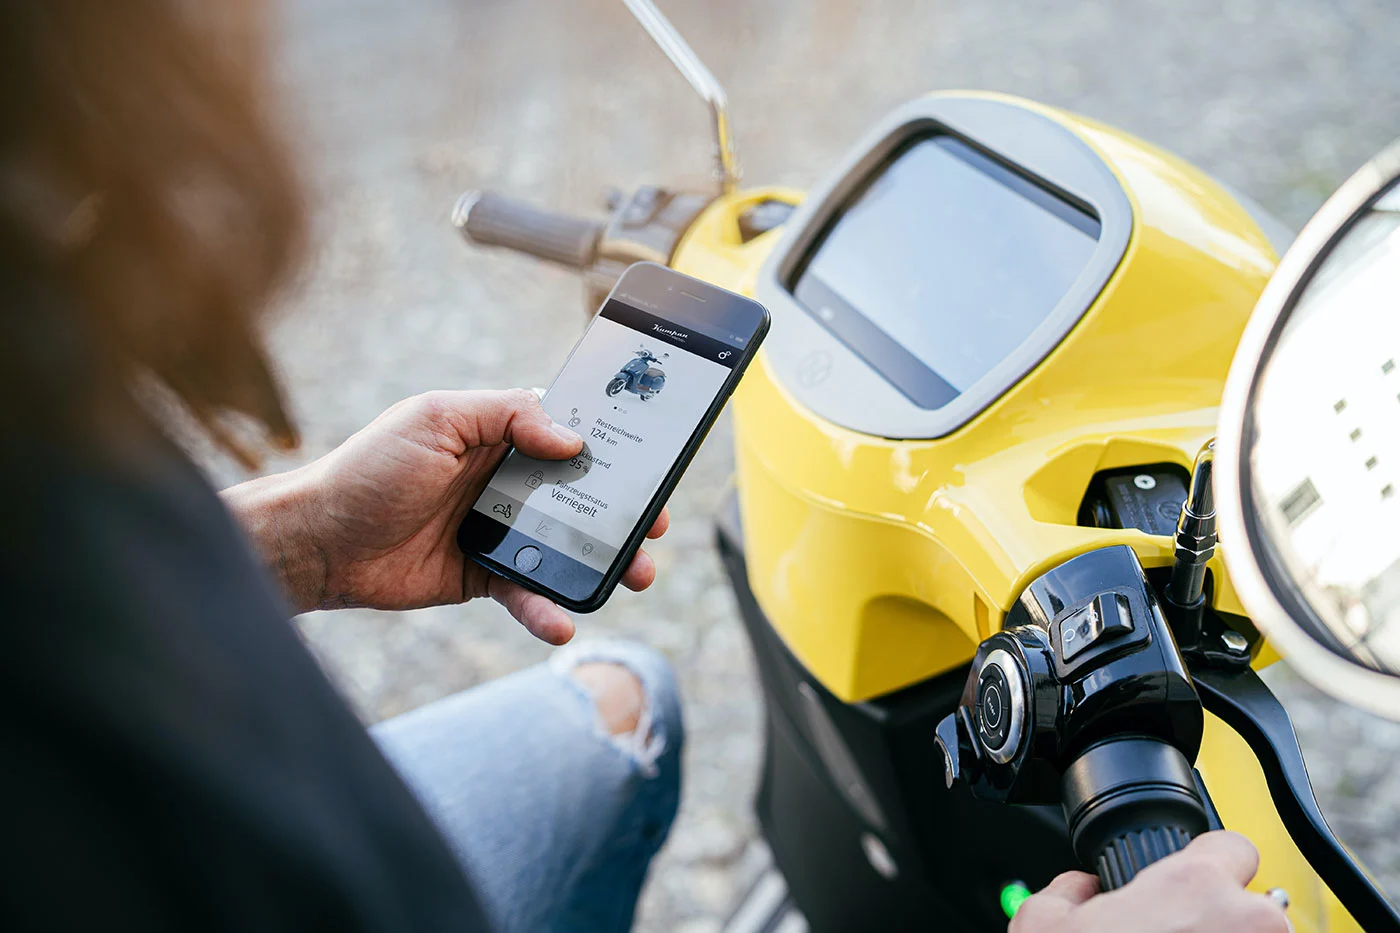 The best apps for motorcyclists